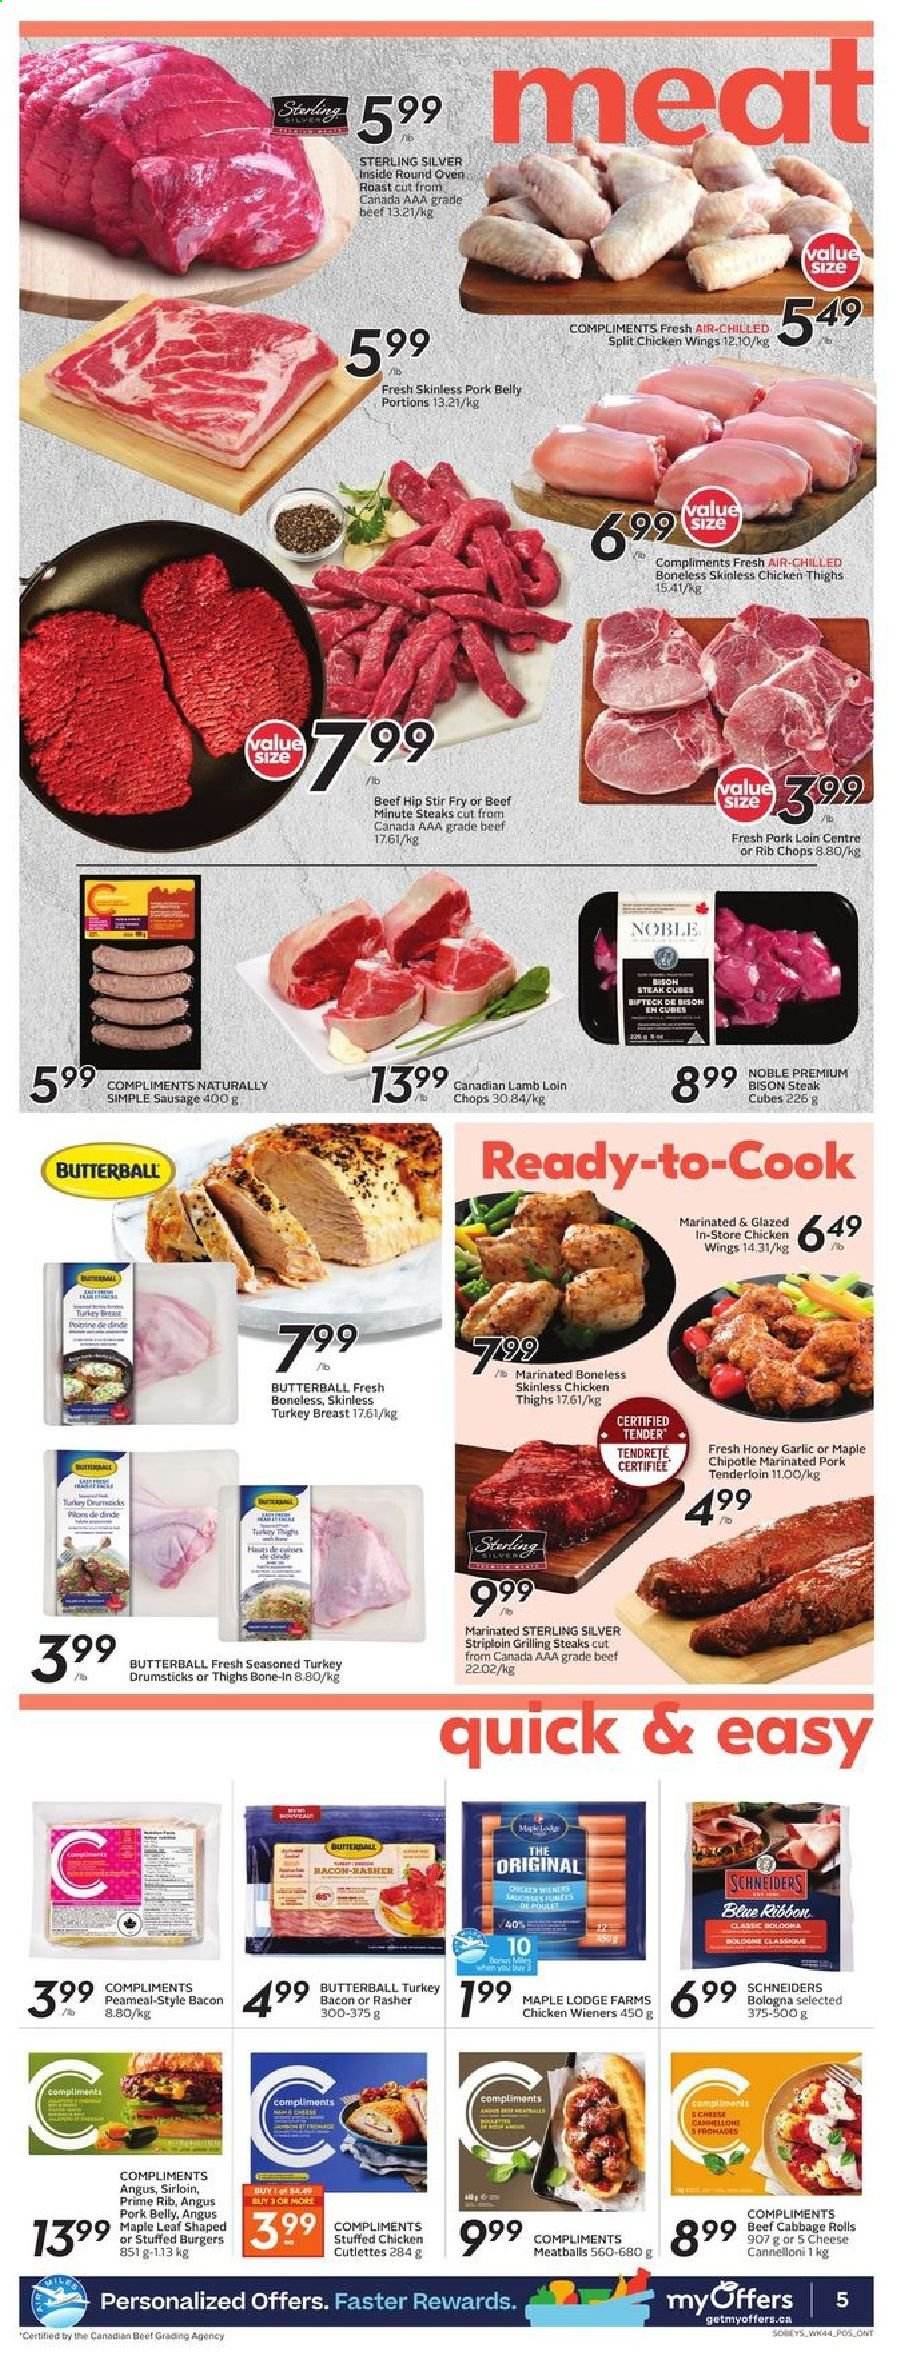 thumbnail - Sobeys Flyer - February 25, 2021 - March 03, 2021 - Sales products - Blue Ribbon, cabbage, garlic, meatballs, hamburger, stuffed chicken, bacon, Butterball, turkey bacon, bologna sausage, sausage, cheese, chicken wings, honey, turkey breast, chicken thighs, chicken, turkey, turkey drumsticks, bison meat, pork belly, pork loin, pork meat, pork tenderloin, marinated pork, rib chops, lamb loin, lamb meat, steak. Page 5.